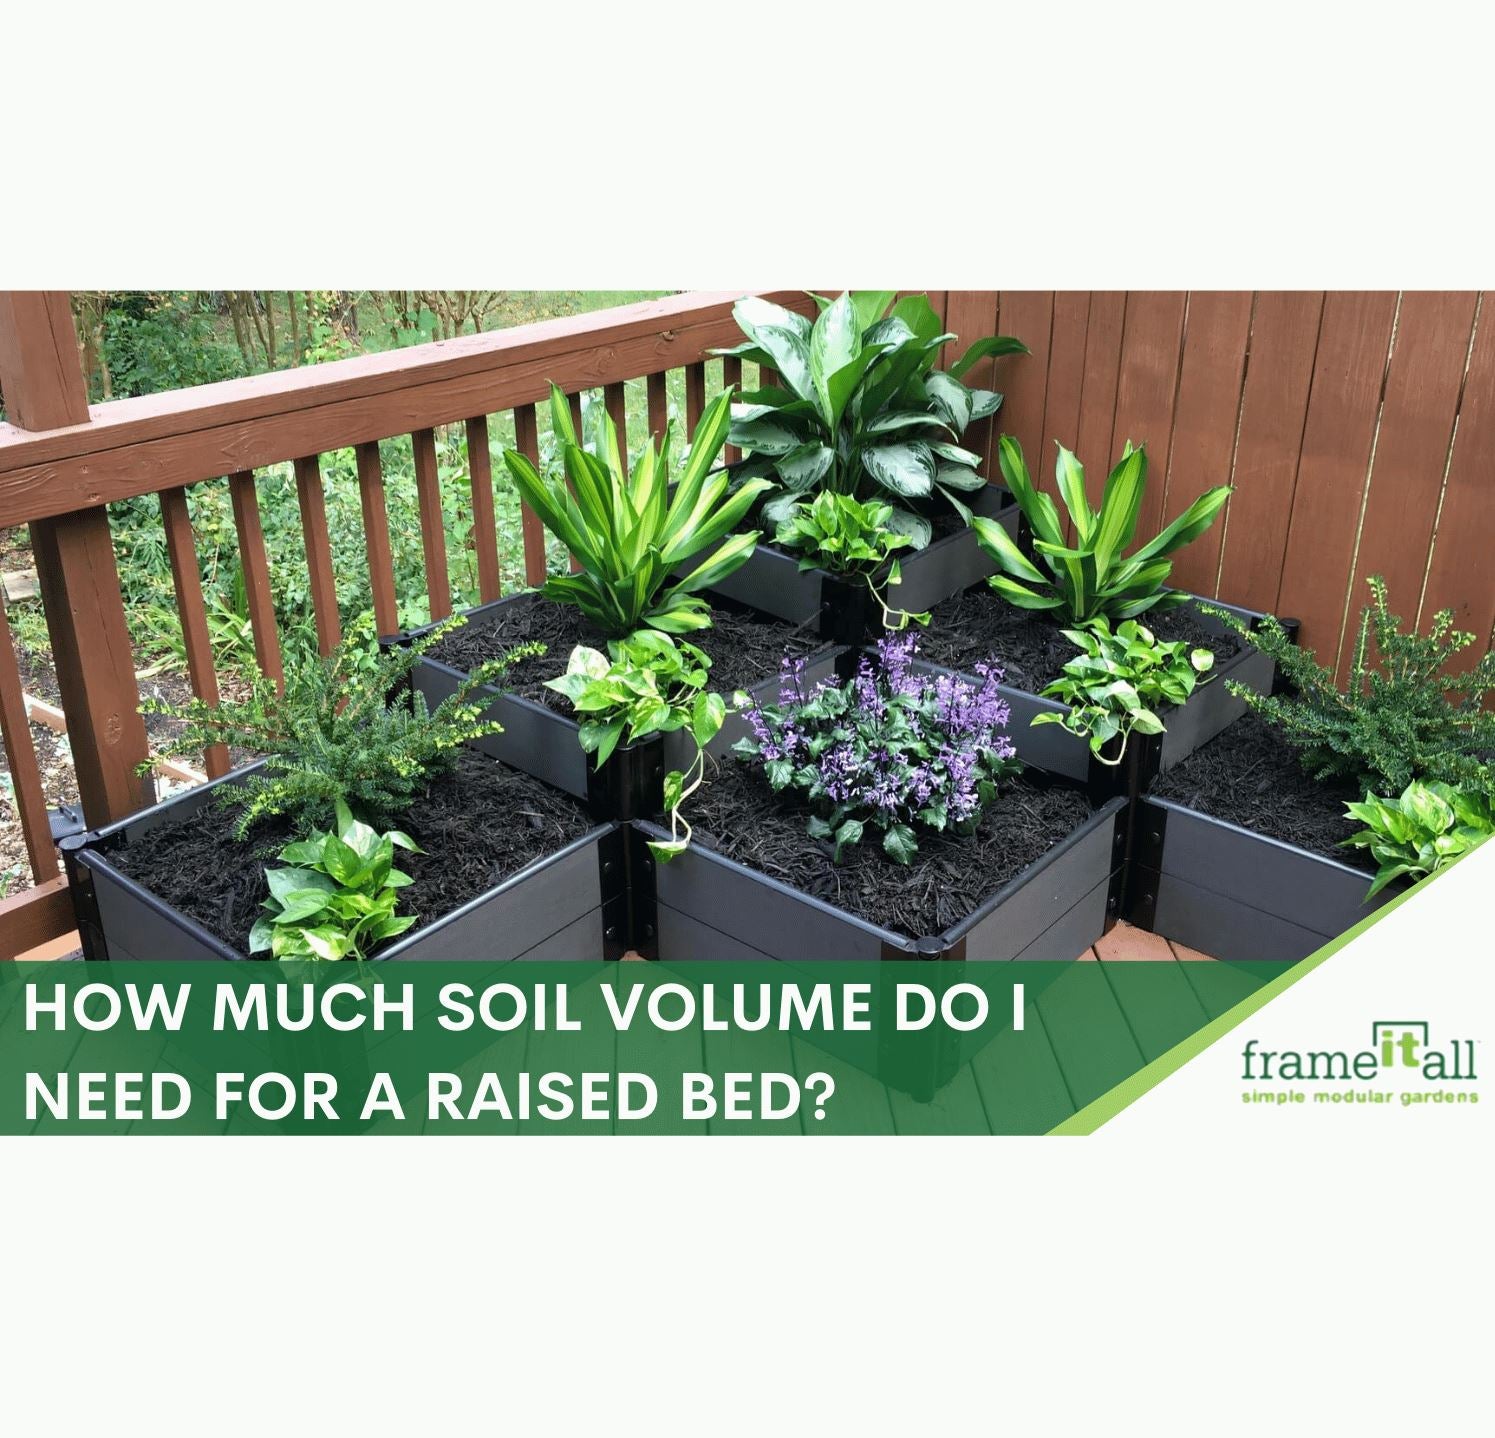 Soil Volume Do I Need For A Raised Bed